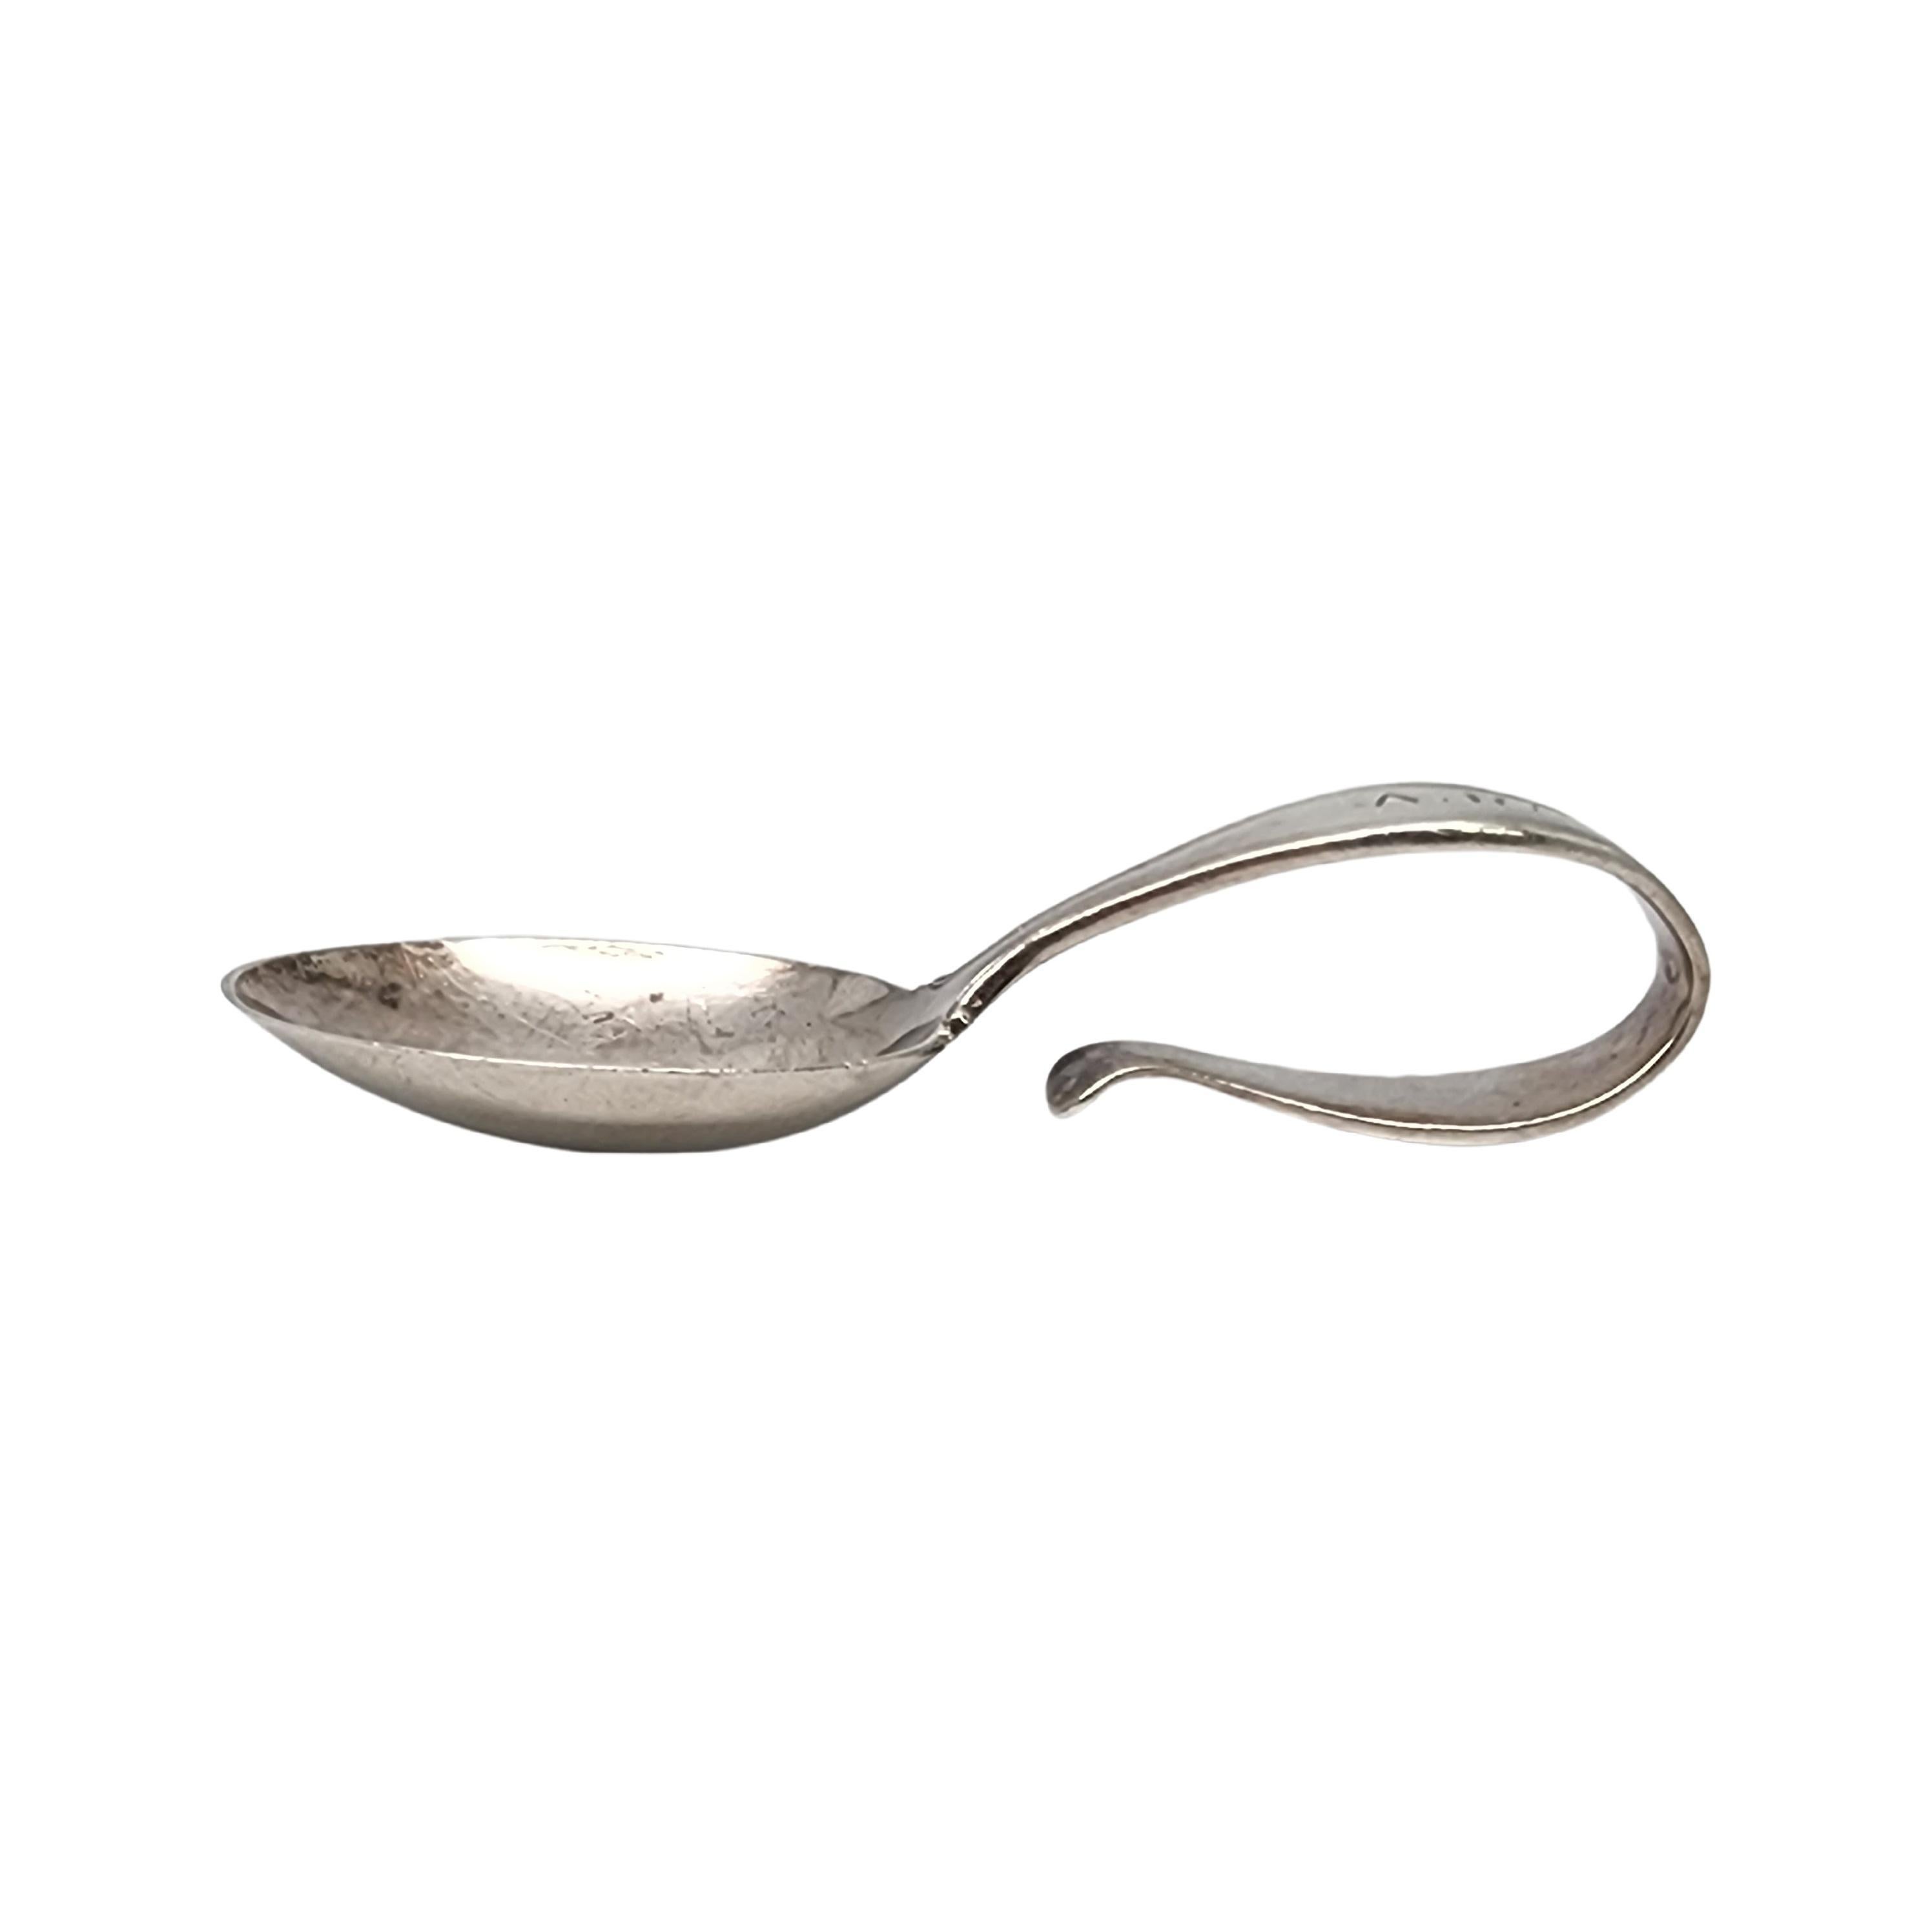 Sterling silver baby spoon with curved loop handle by Tiffany & Co with monogram.

Monogram appears to be AR

Timeless small baby/child feeding spoon featuring a curved loop handle. Hallmarks date this piece to manufacture under the directorship of